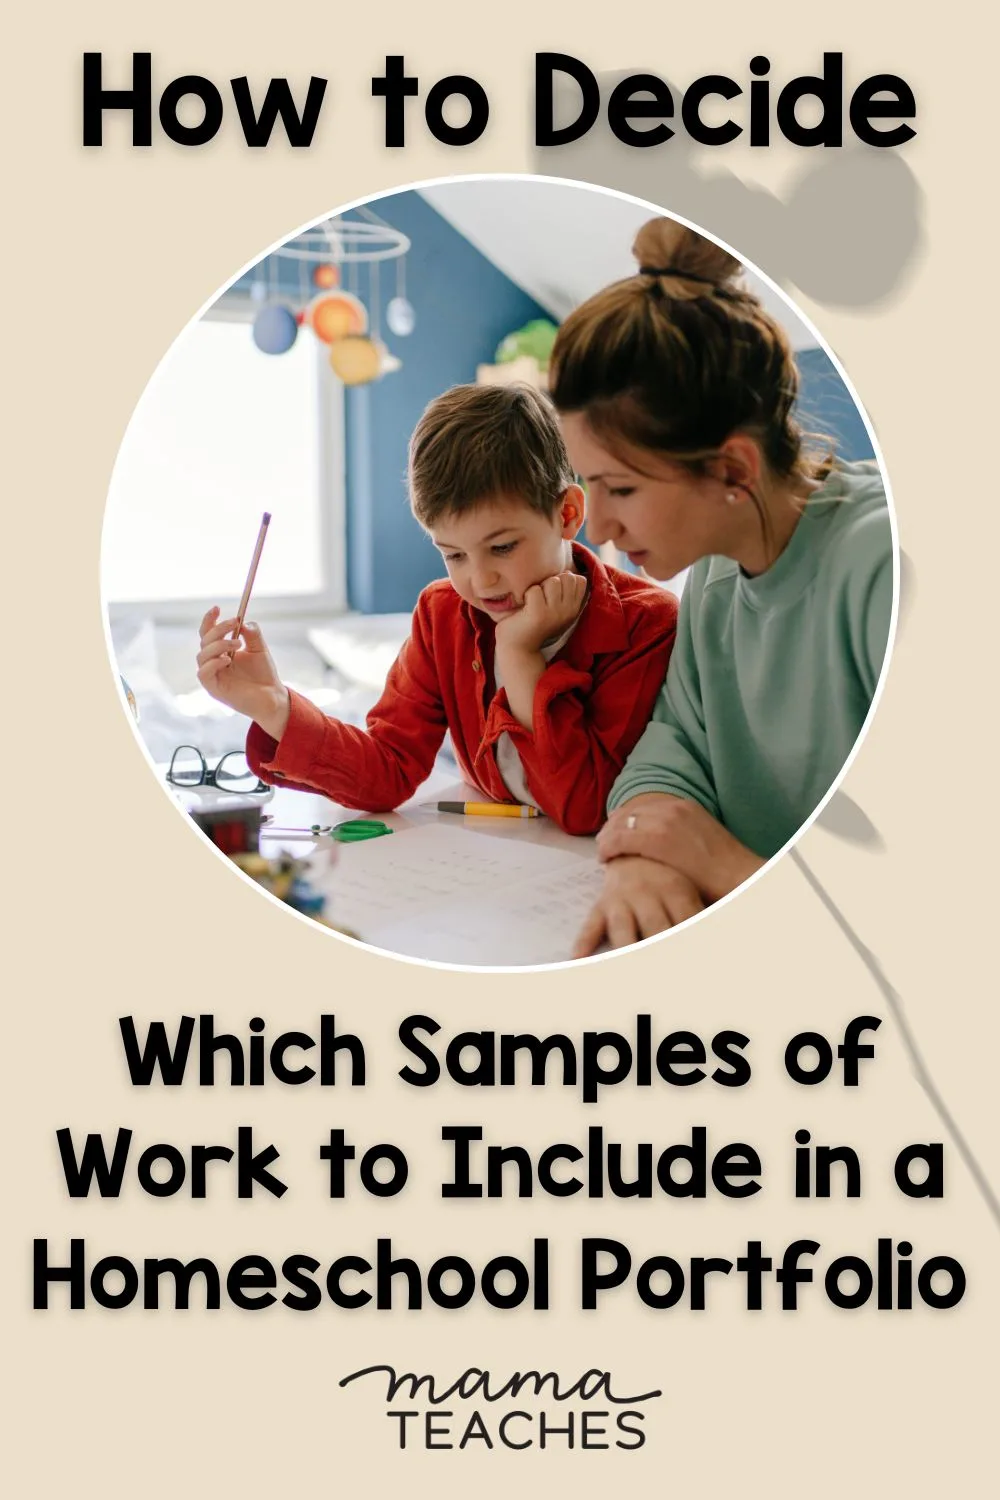 How to Decide Which Samples of Work to Include in a Homeschool Portfolio